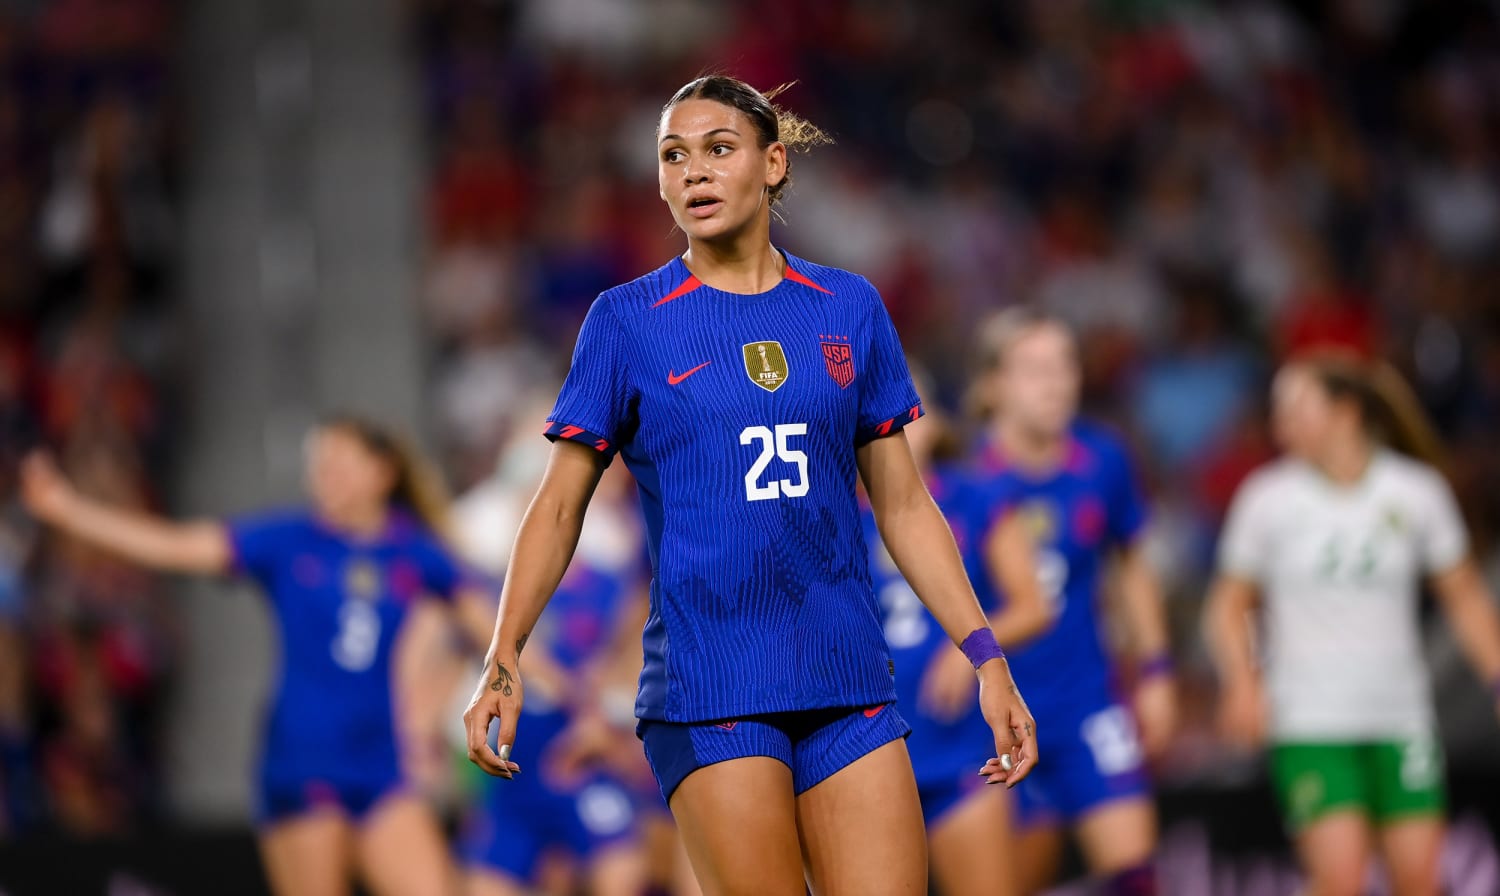 Let the Women's World Cup Inspire Your Fit